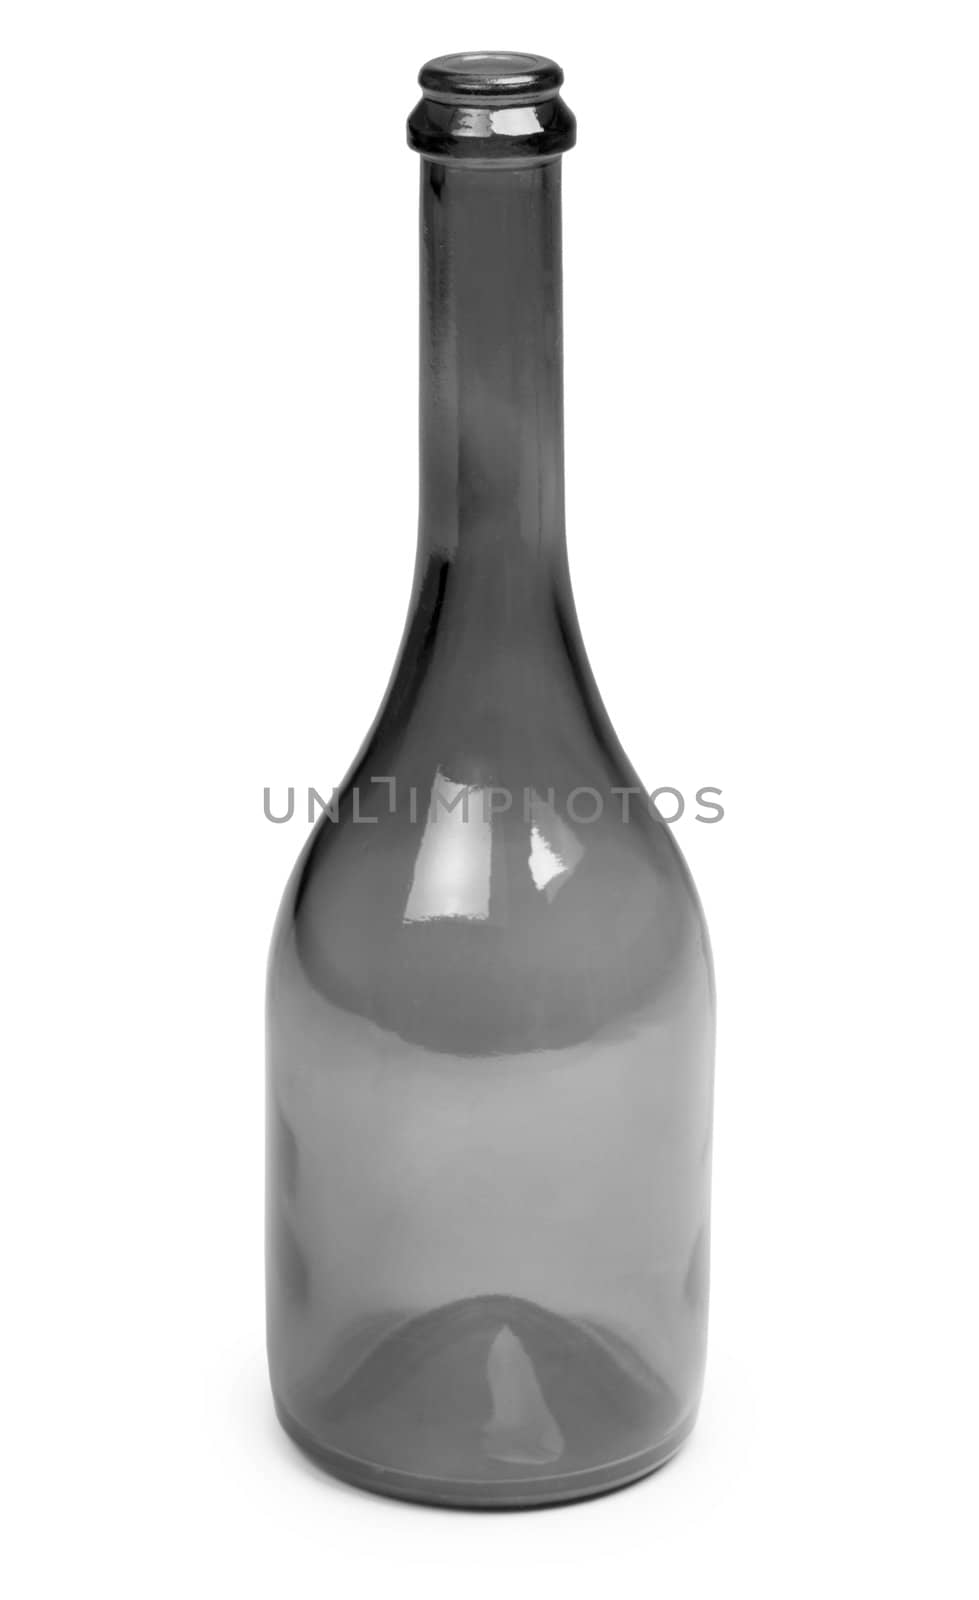 Glass bottle - a symbol of alcoholism, isolated on a white background